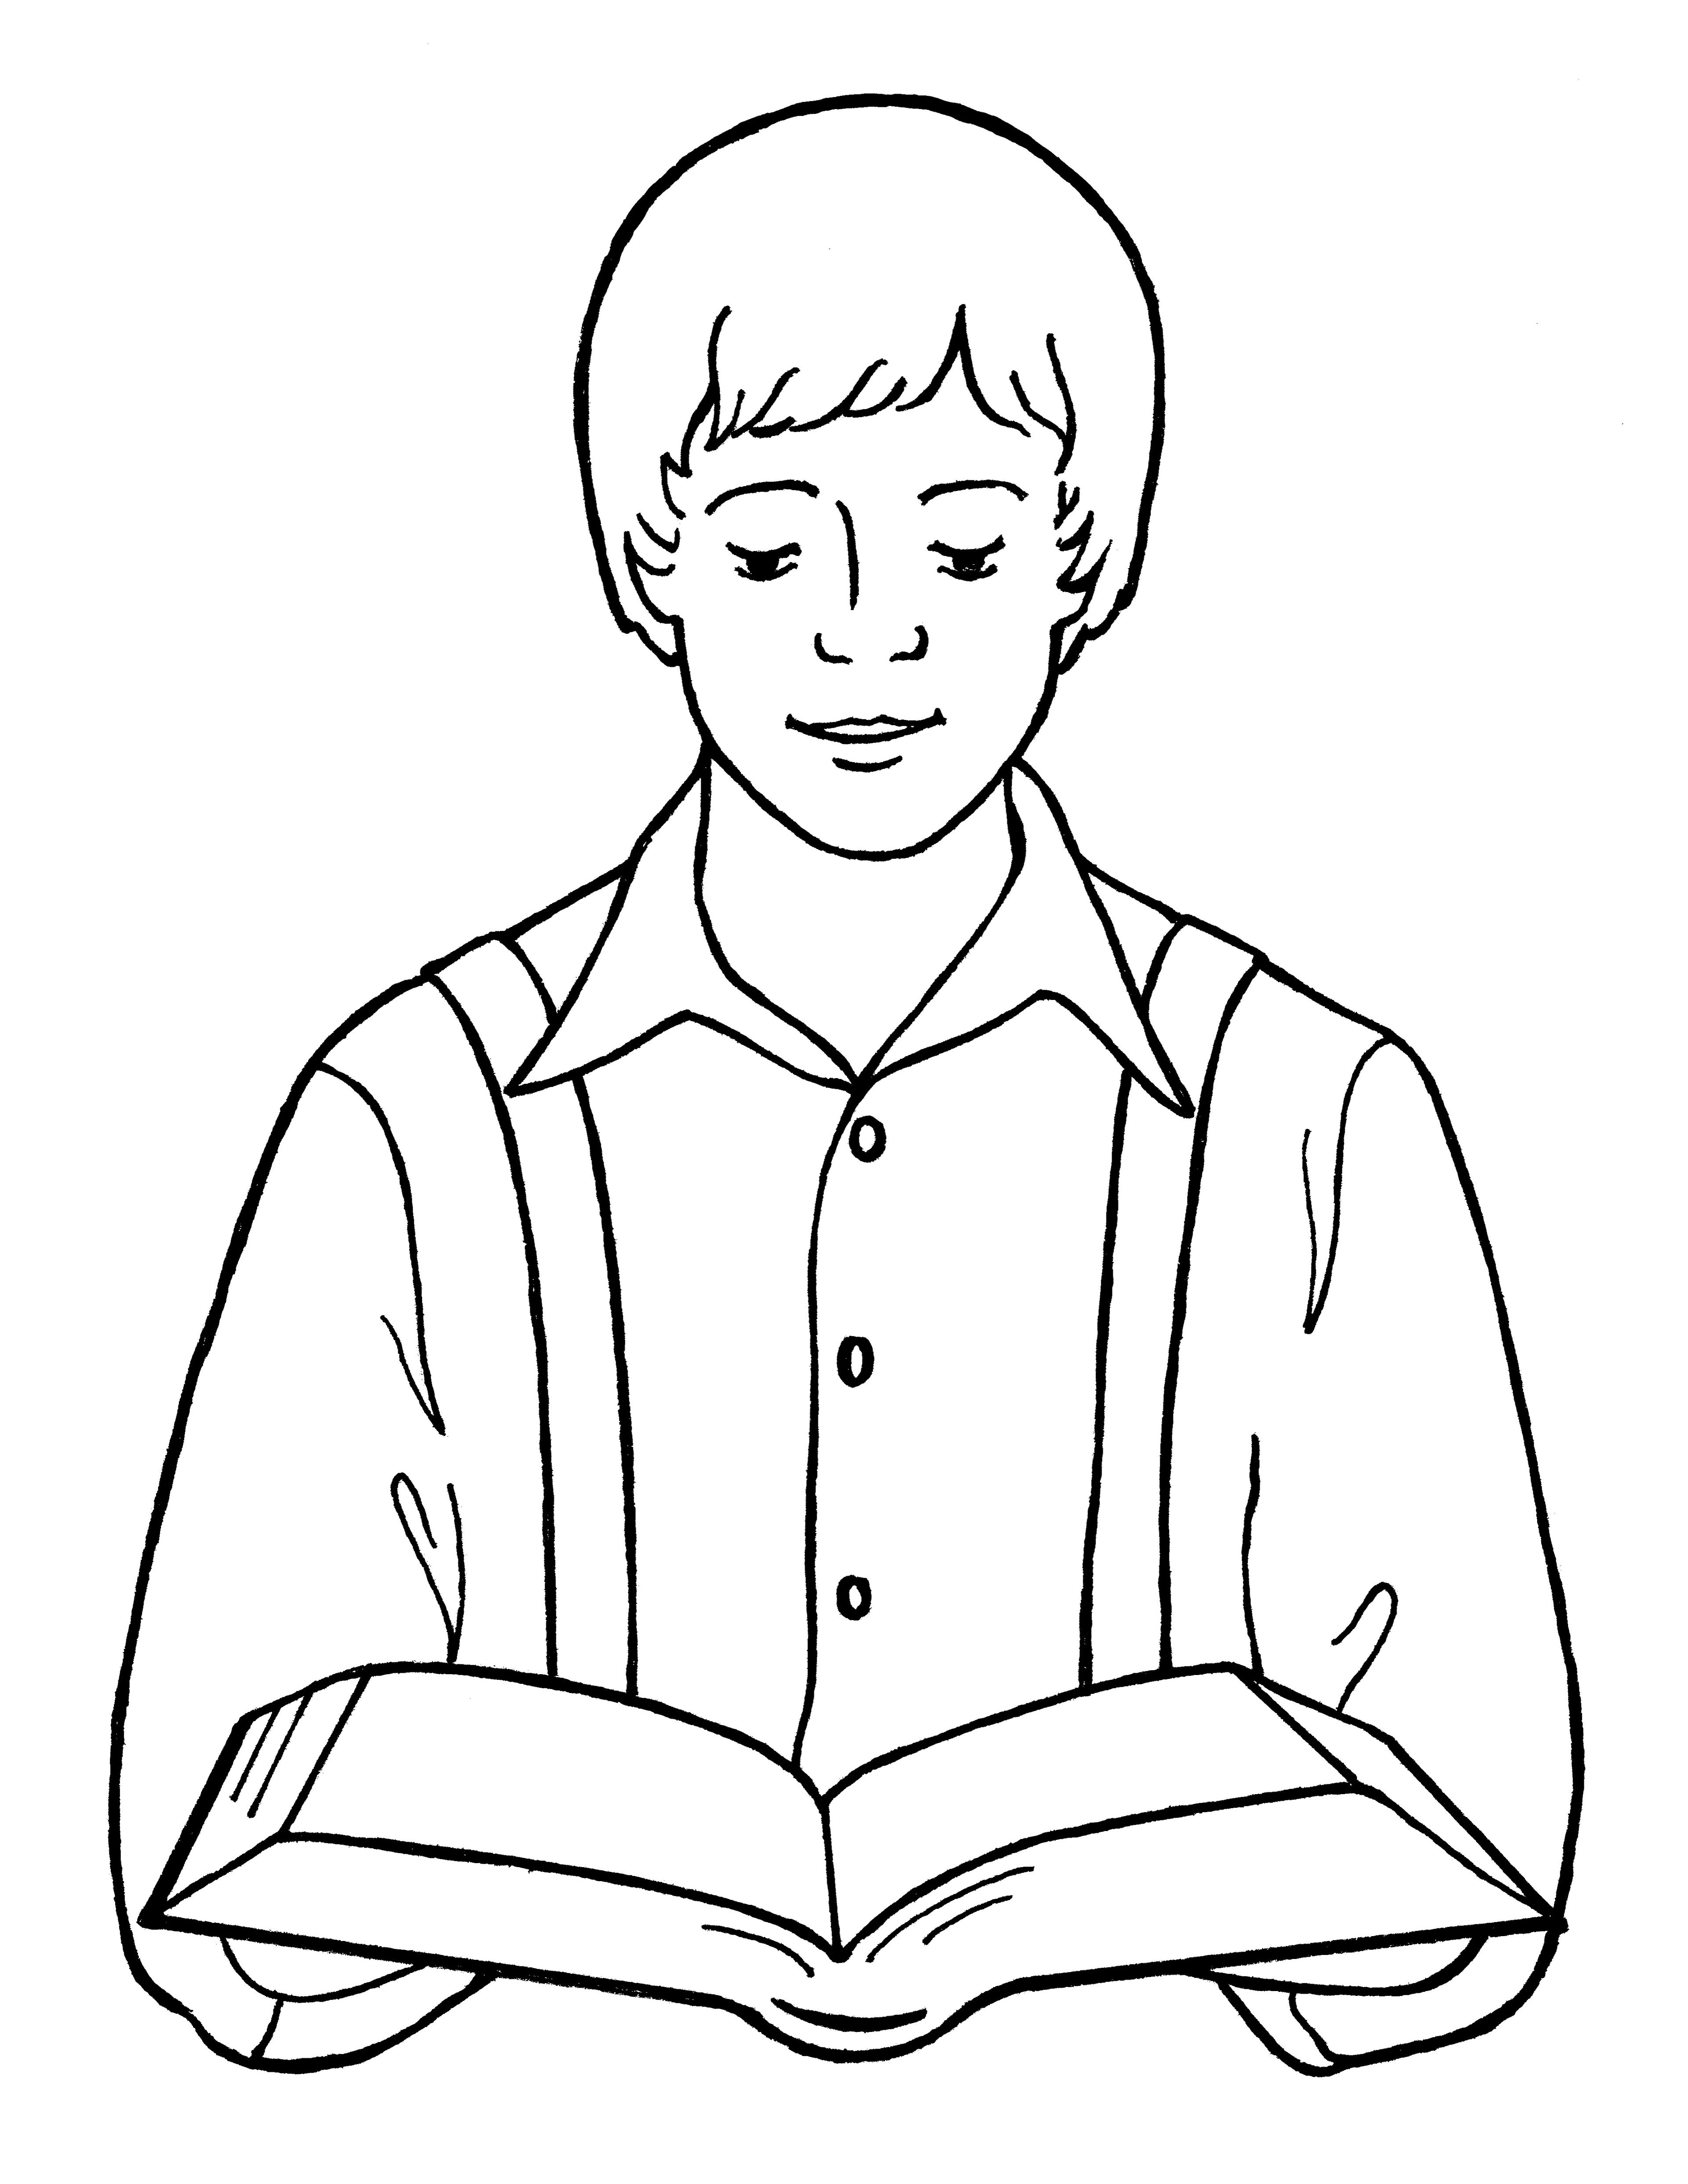 An illustration of Joseph Smith reading the scriptures, from the nursery manual Behold Your Little Ones (2008), page 91.